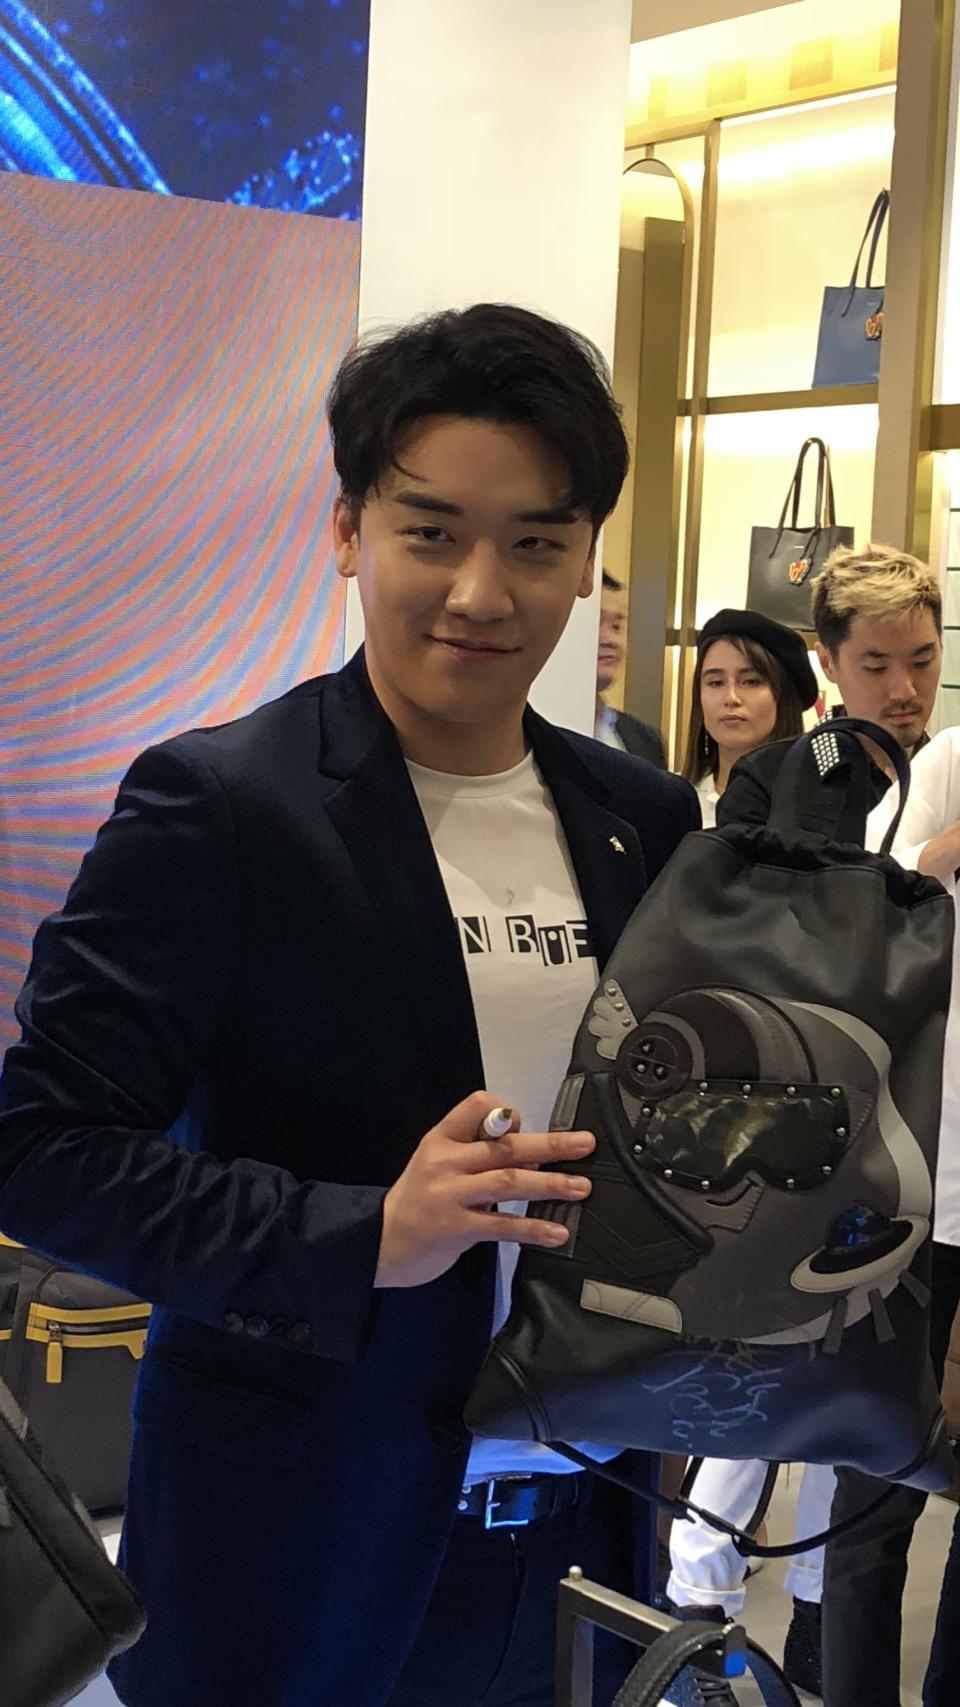 Seungri autographing merchandise for fans. (Photo: Wenting/Yahoo Lifestyle)